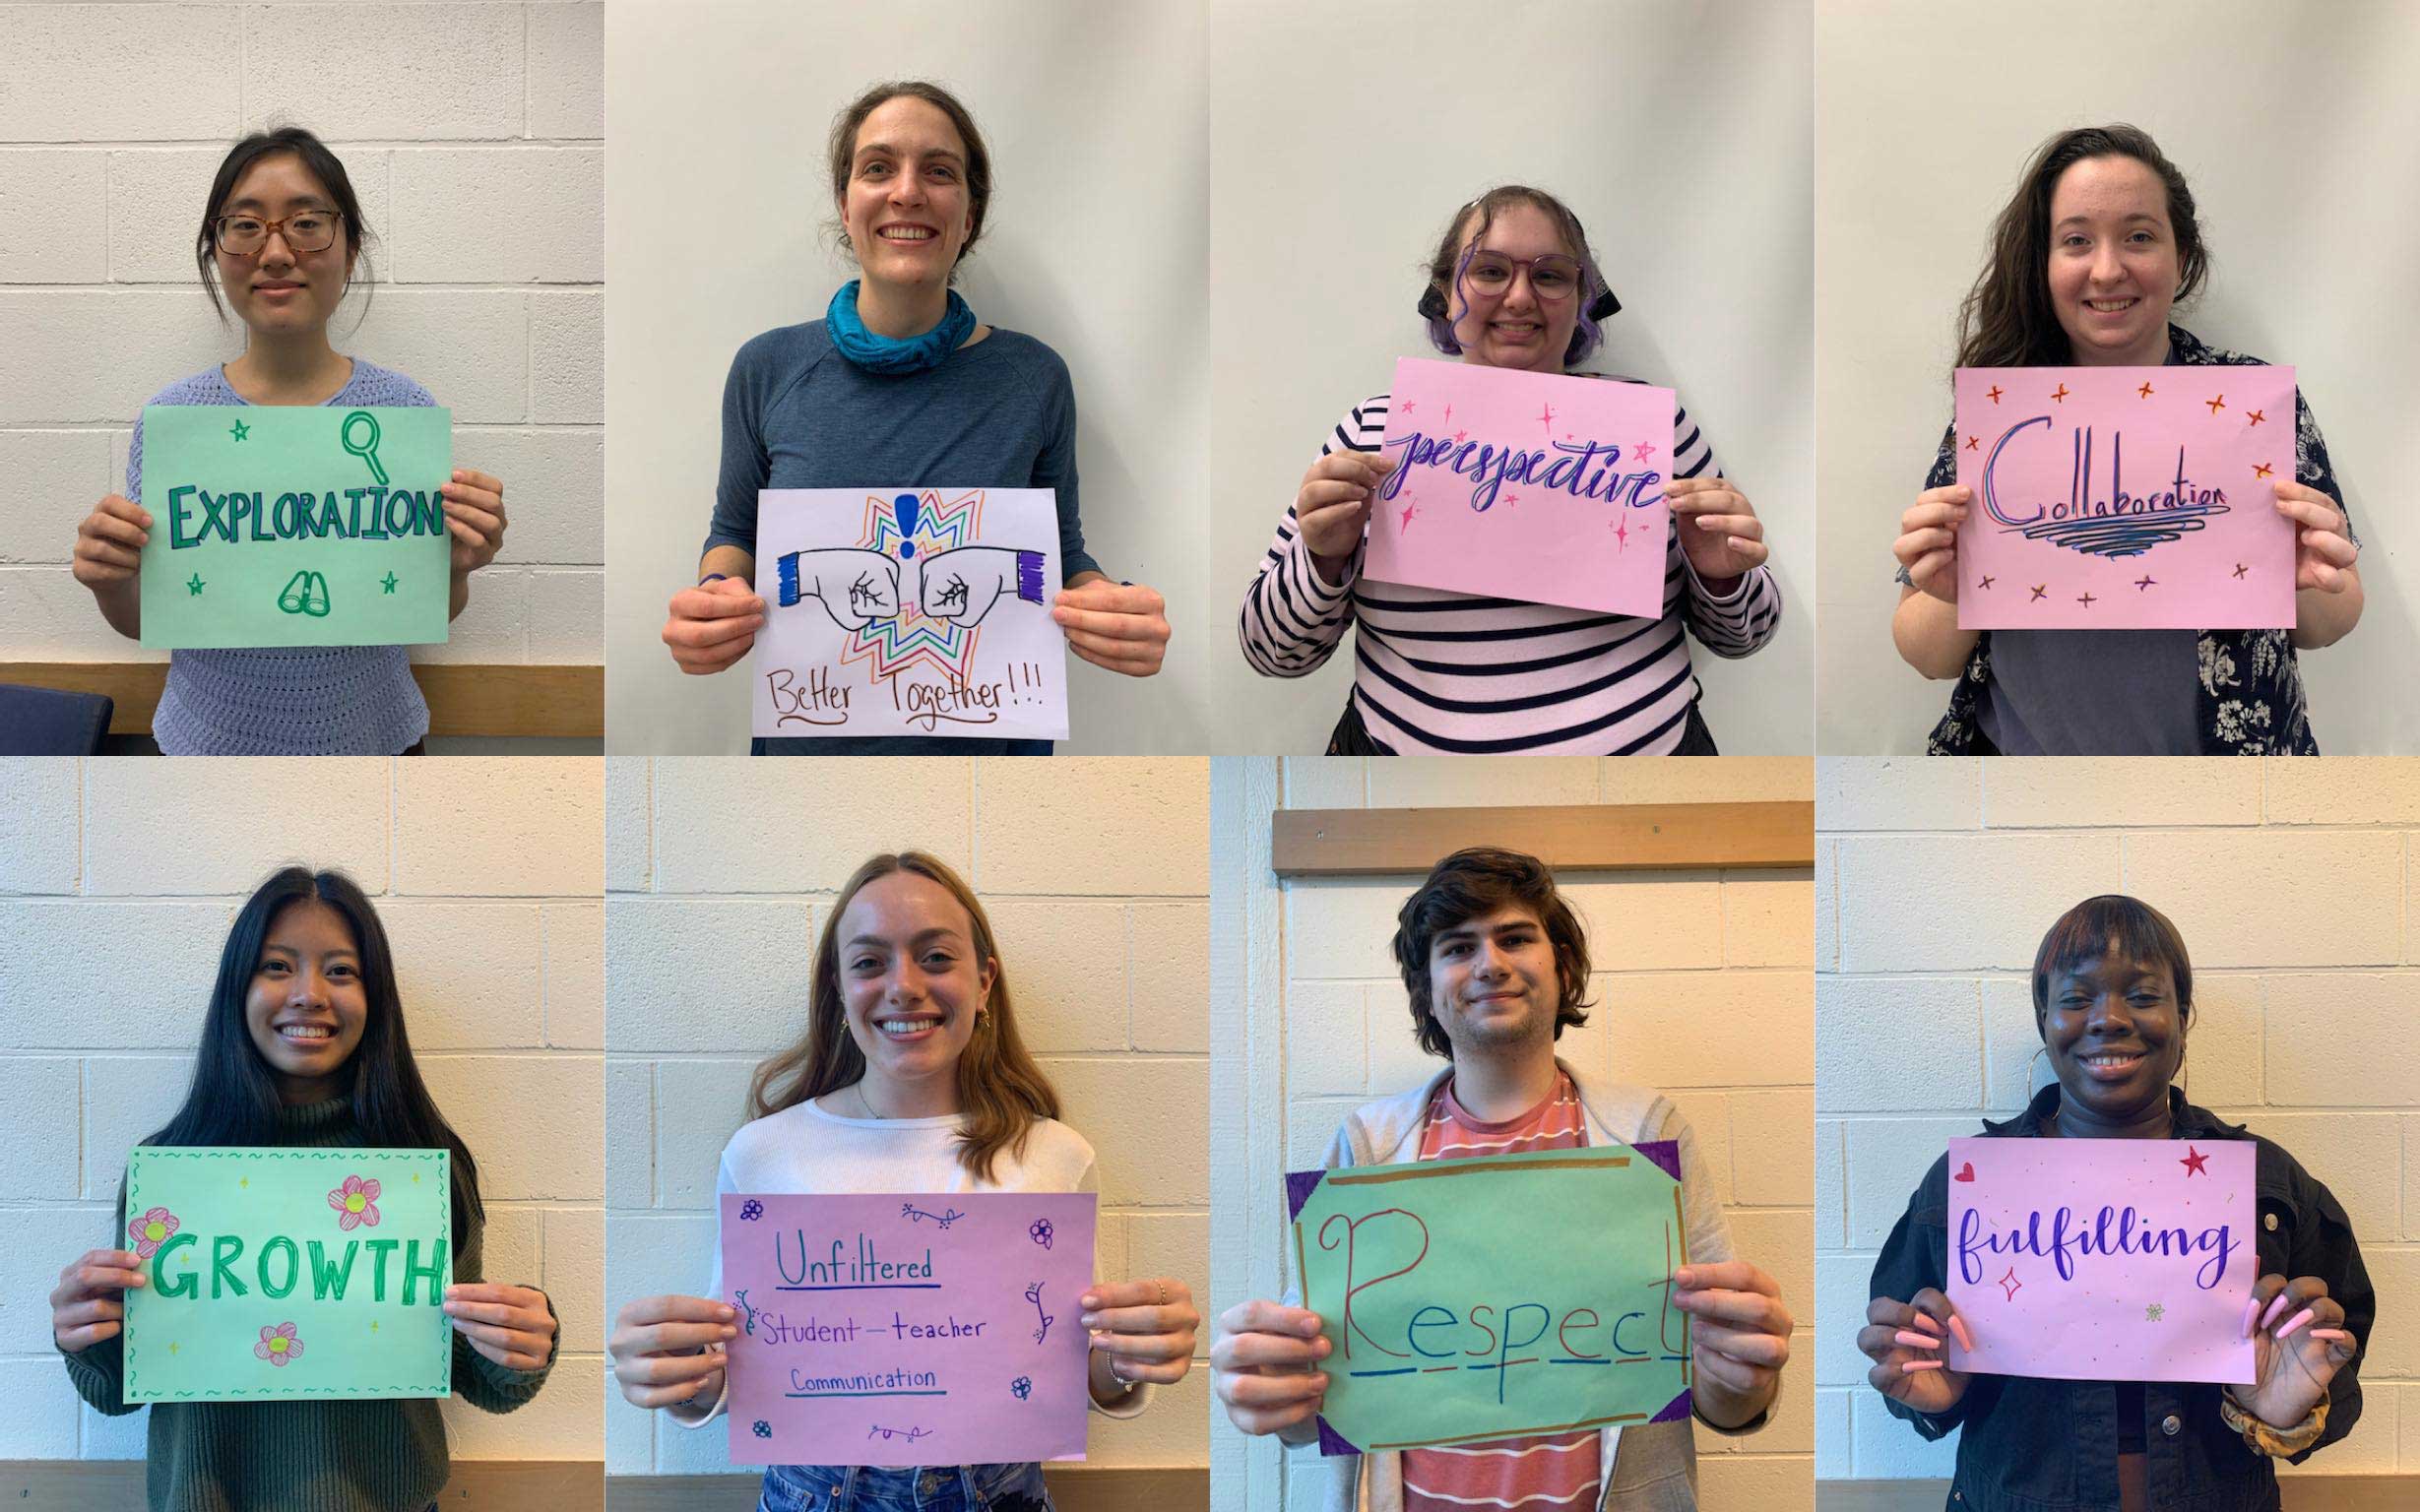 A grid of photos. Each shows a student standing against a wall, smiling and holding a hand-lettered sign with a word on it. Words include “Exploration”, “Better Together”, “Collaboration”, and “Growth”.